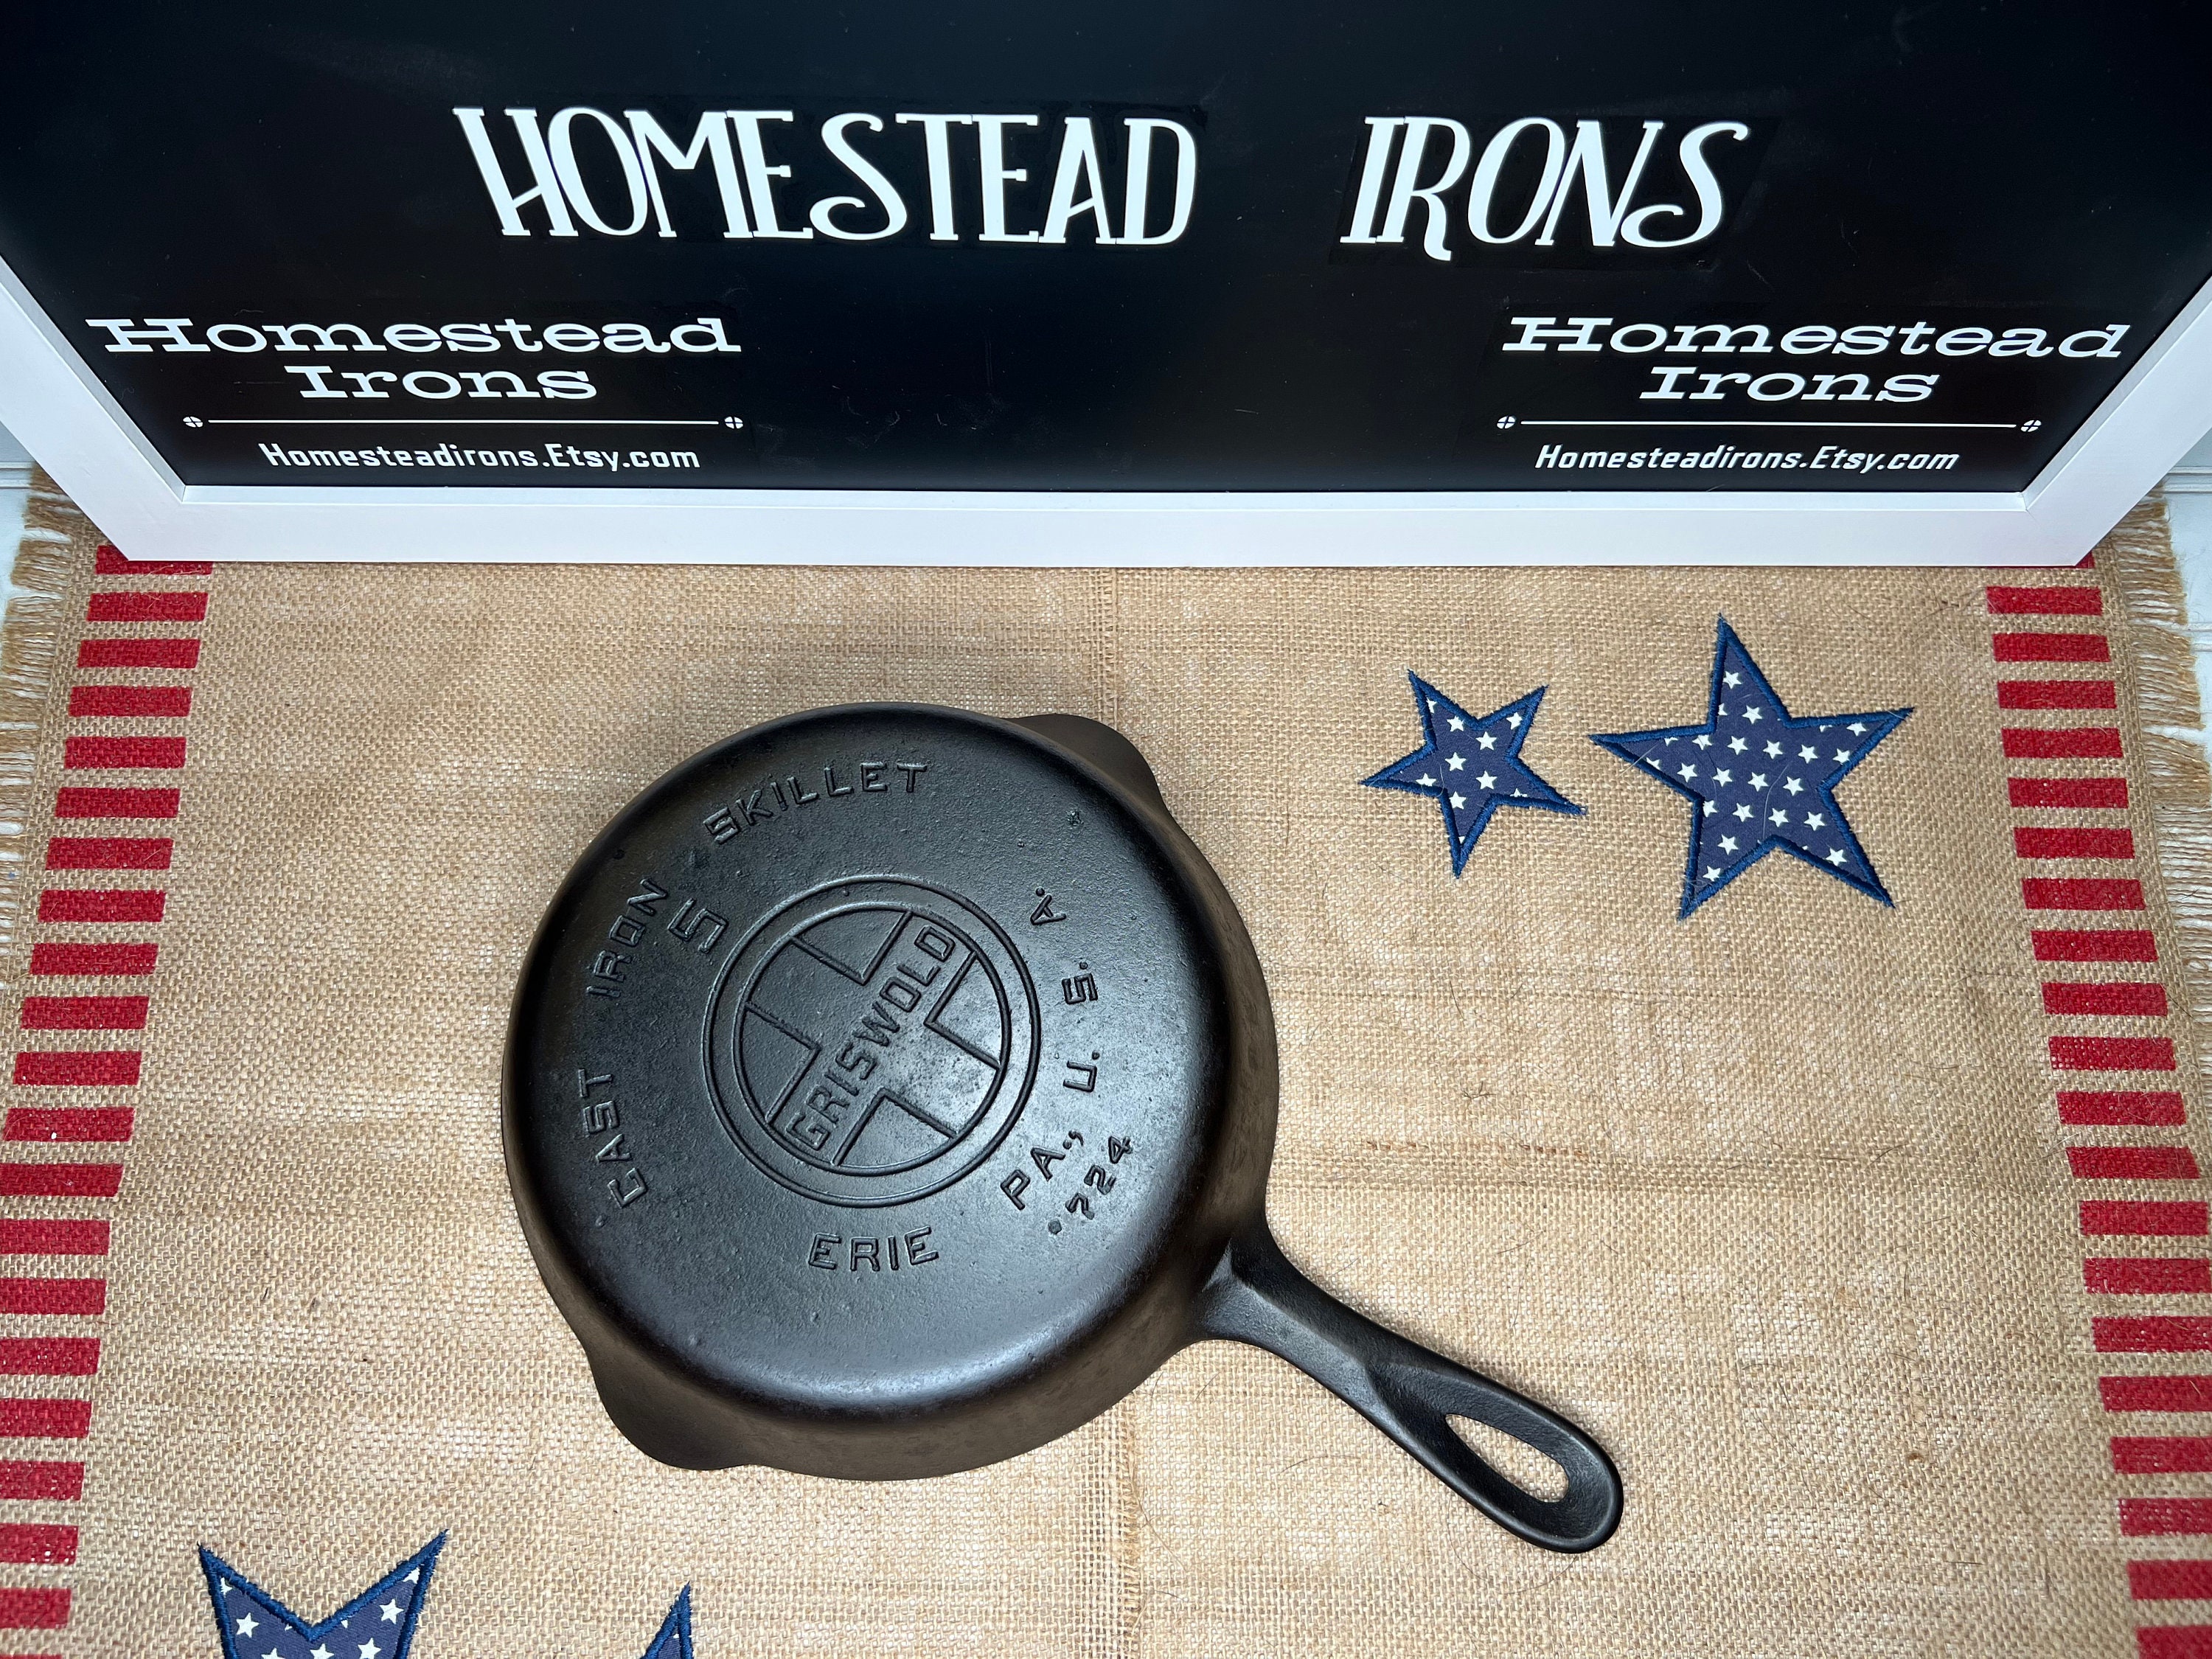 Vintage Griswold Large Block Logo #3 Cast Iron Skillet 709 B – The Forge at  Pleasant Valley Farm